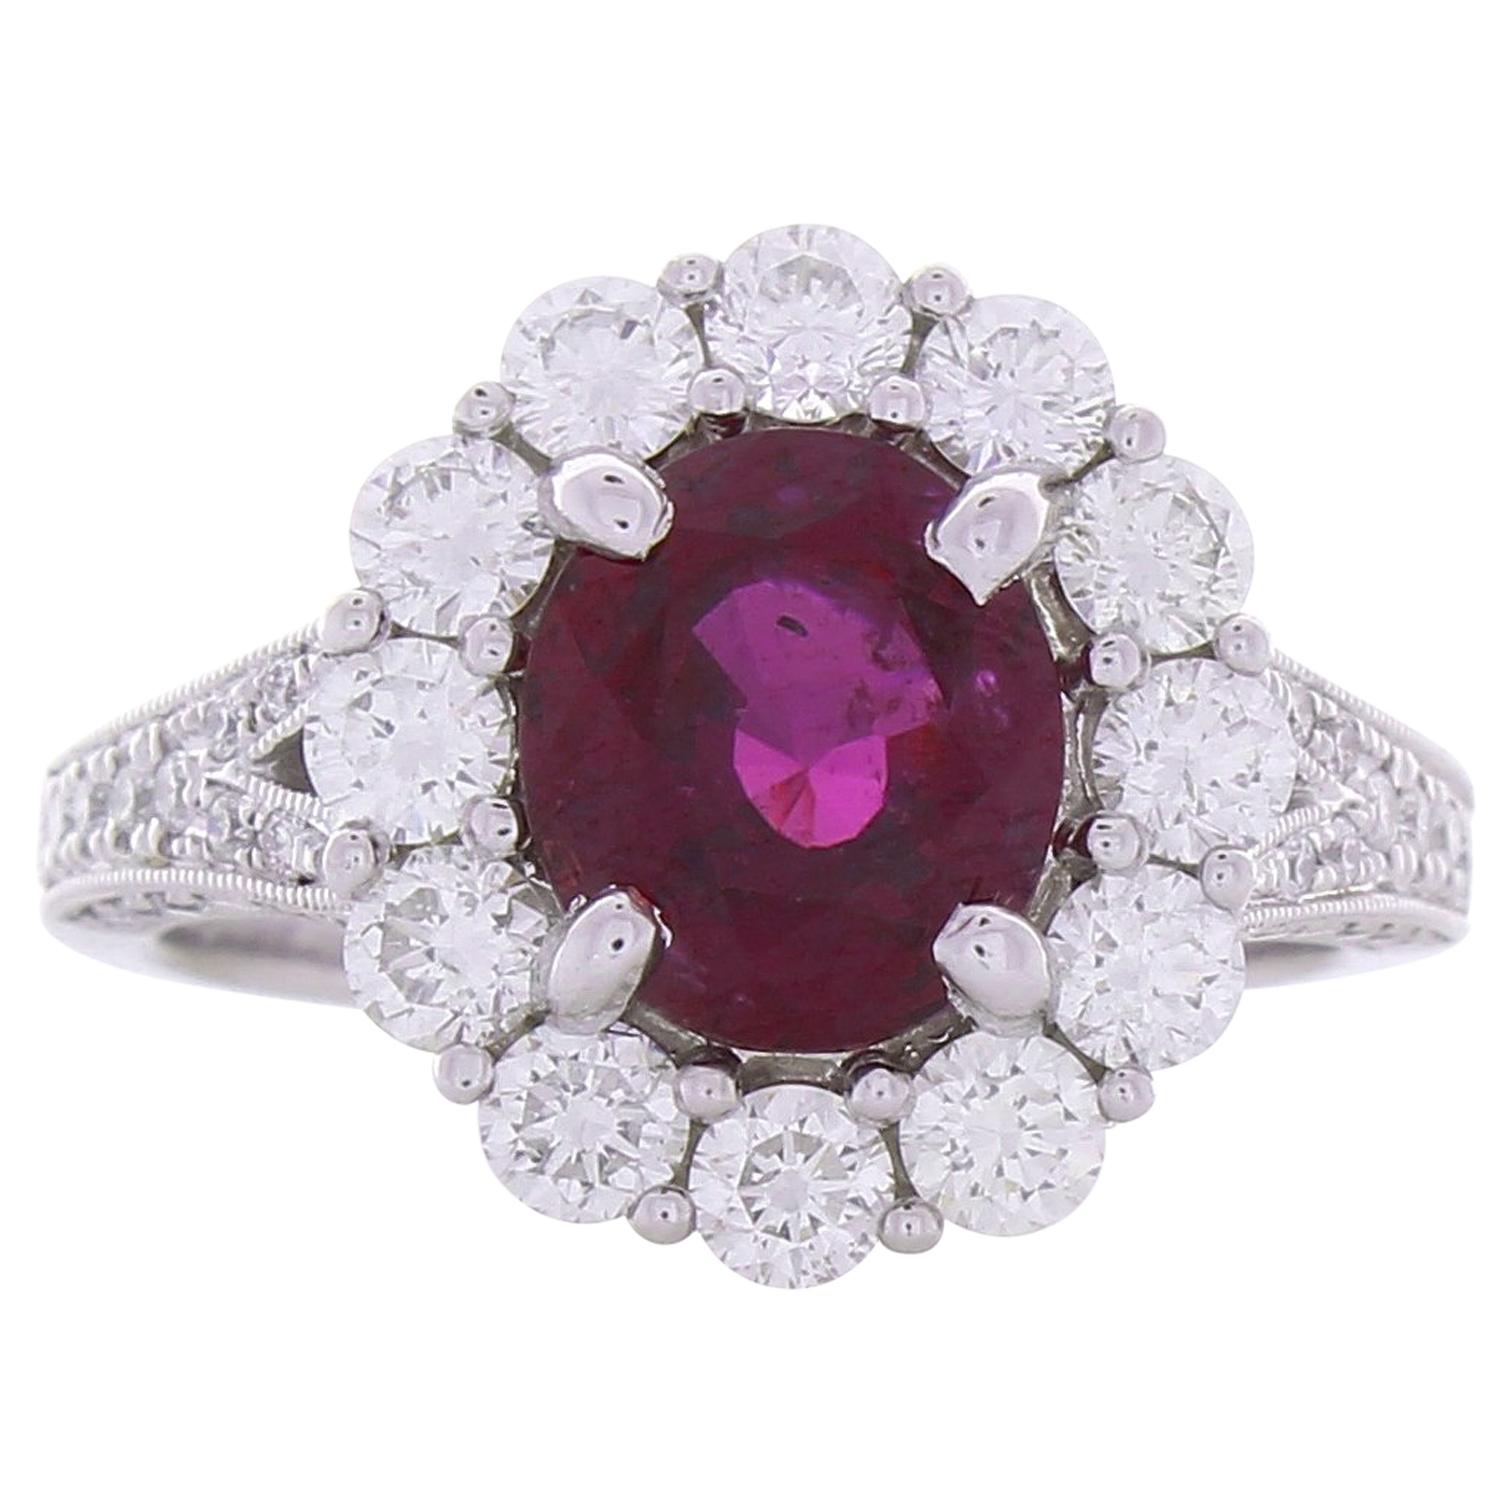 2.97 Carat Oval Purple Sapphire and Diamond Cocktail Ring in 18 Karat White Gold